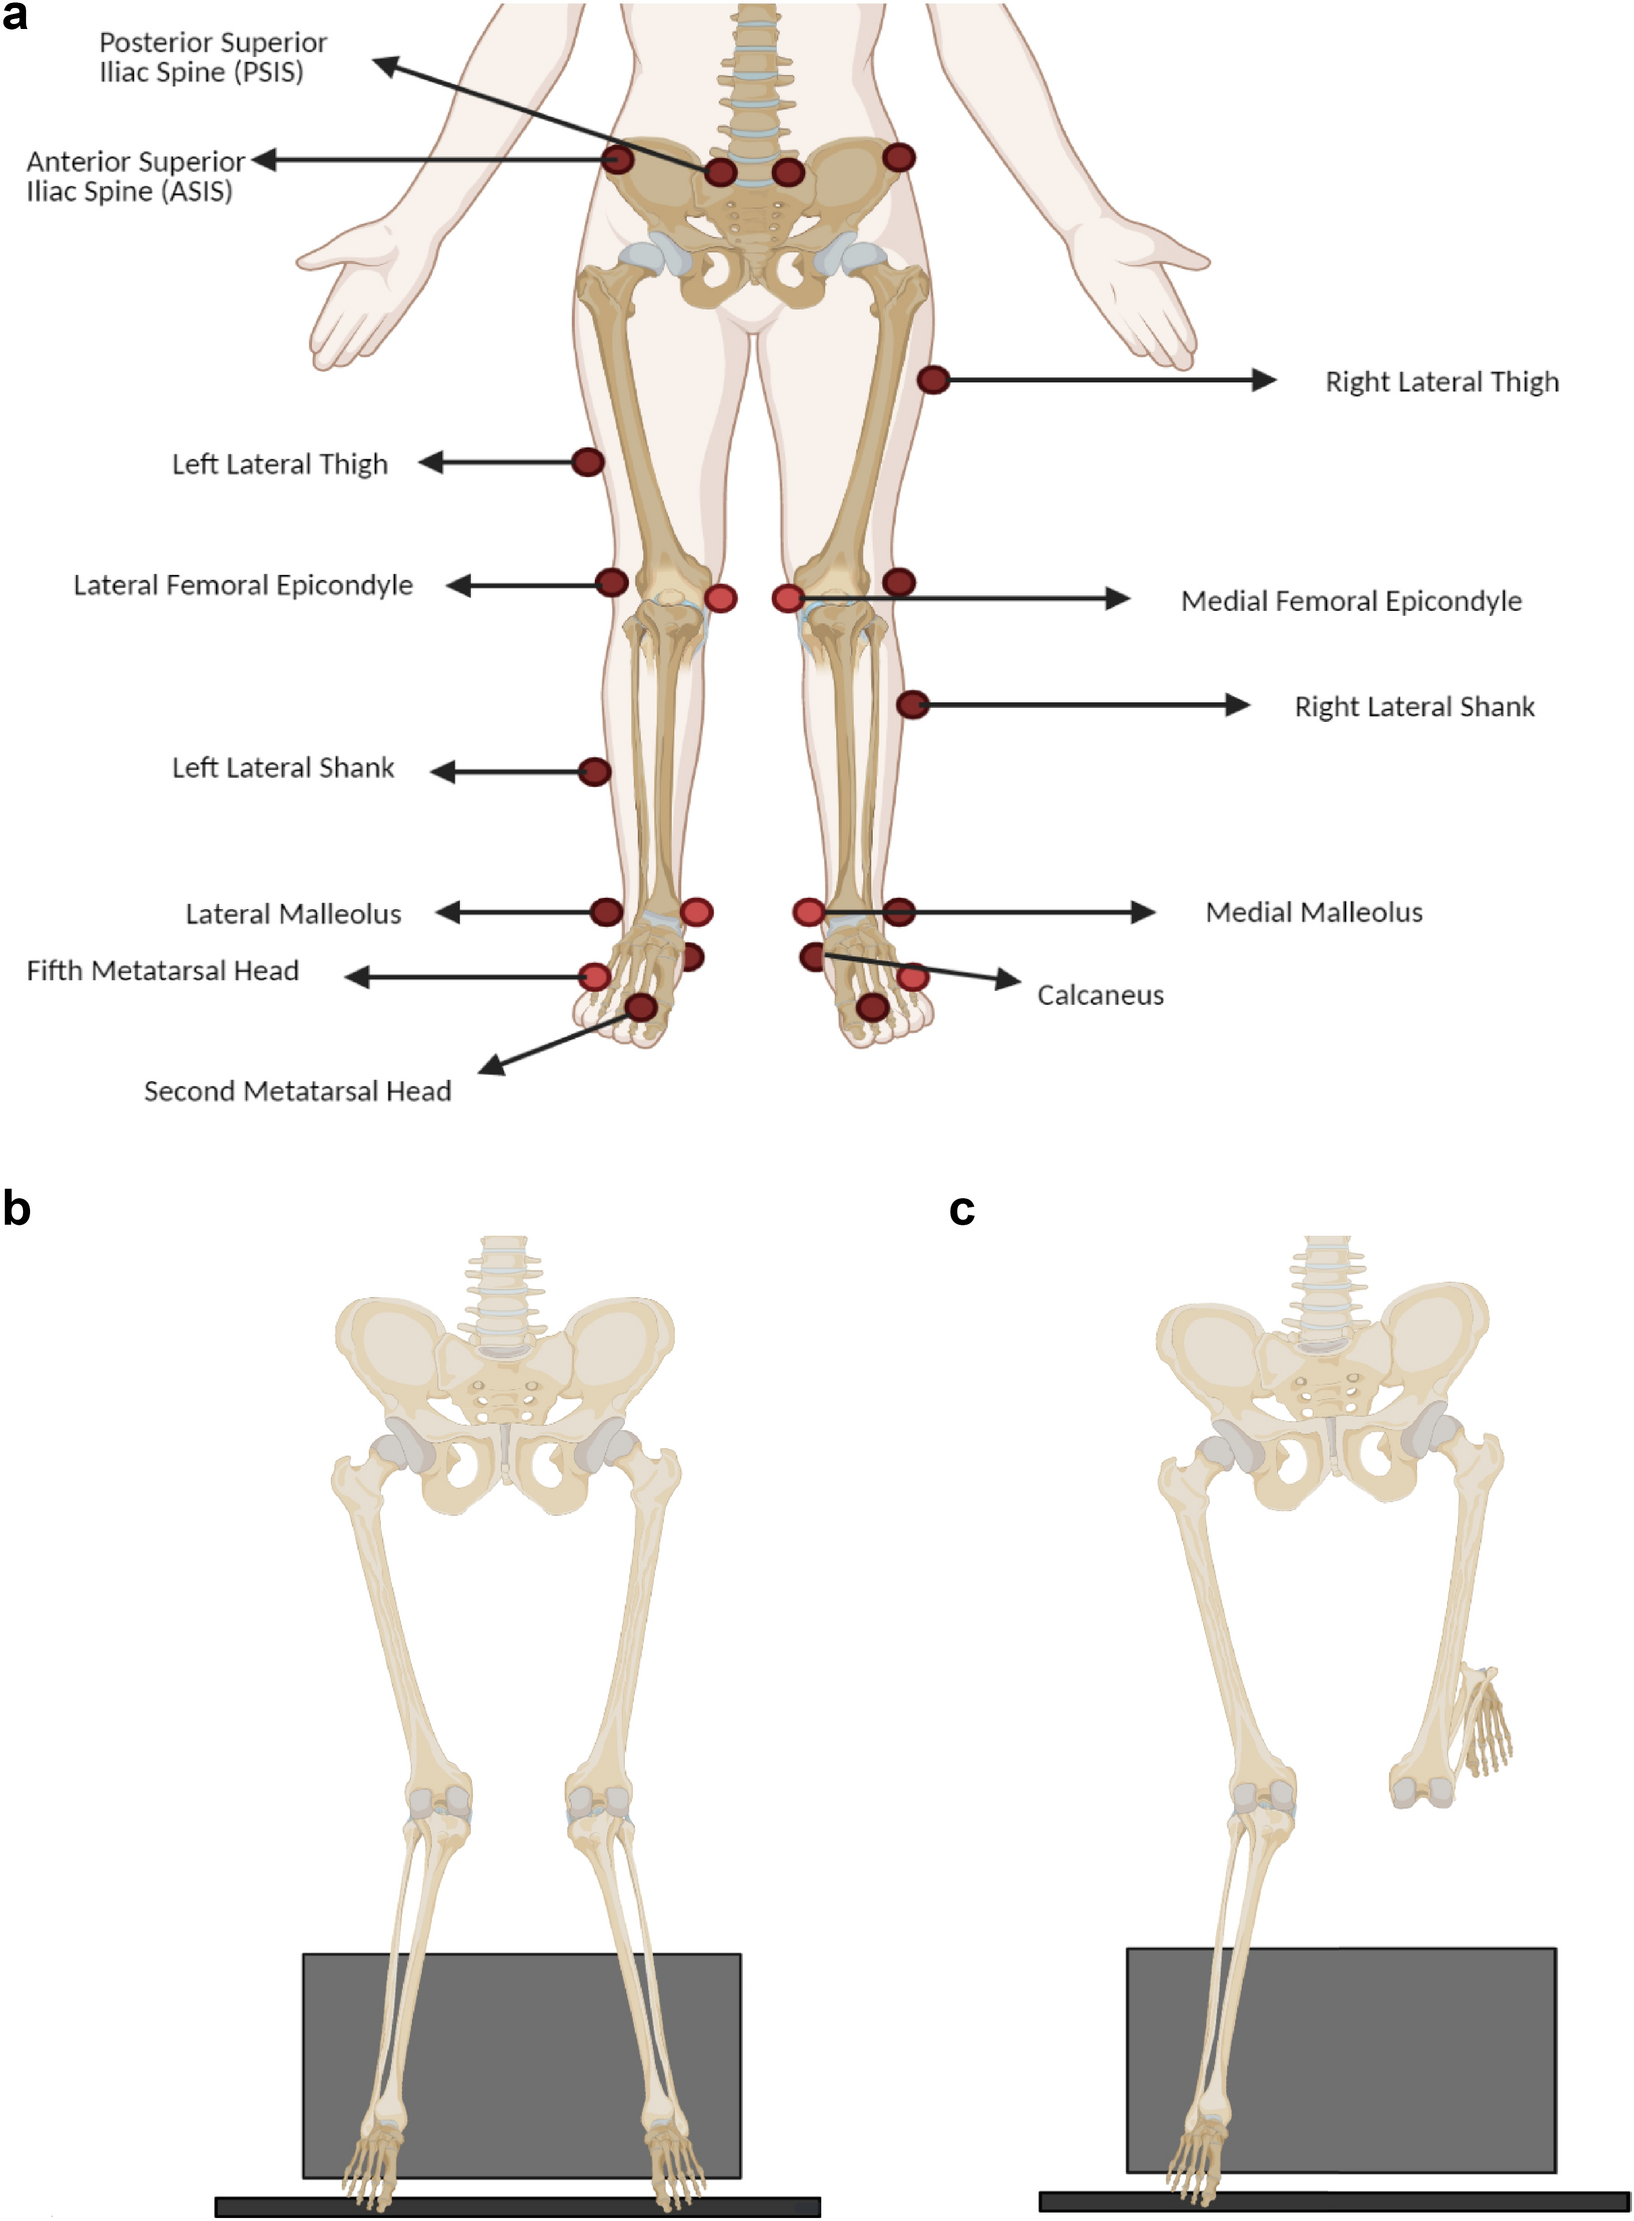 Frontiers  Whole-Body Mechanics of Double-Leg Attack in Elite and